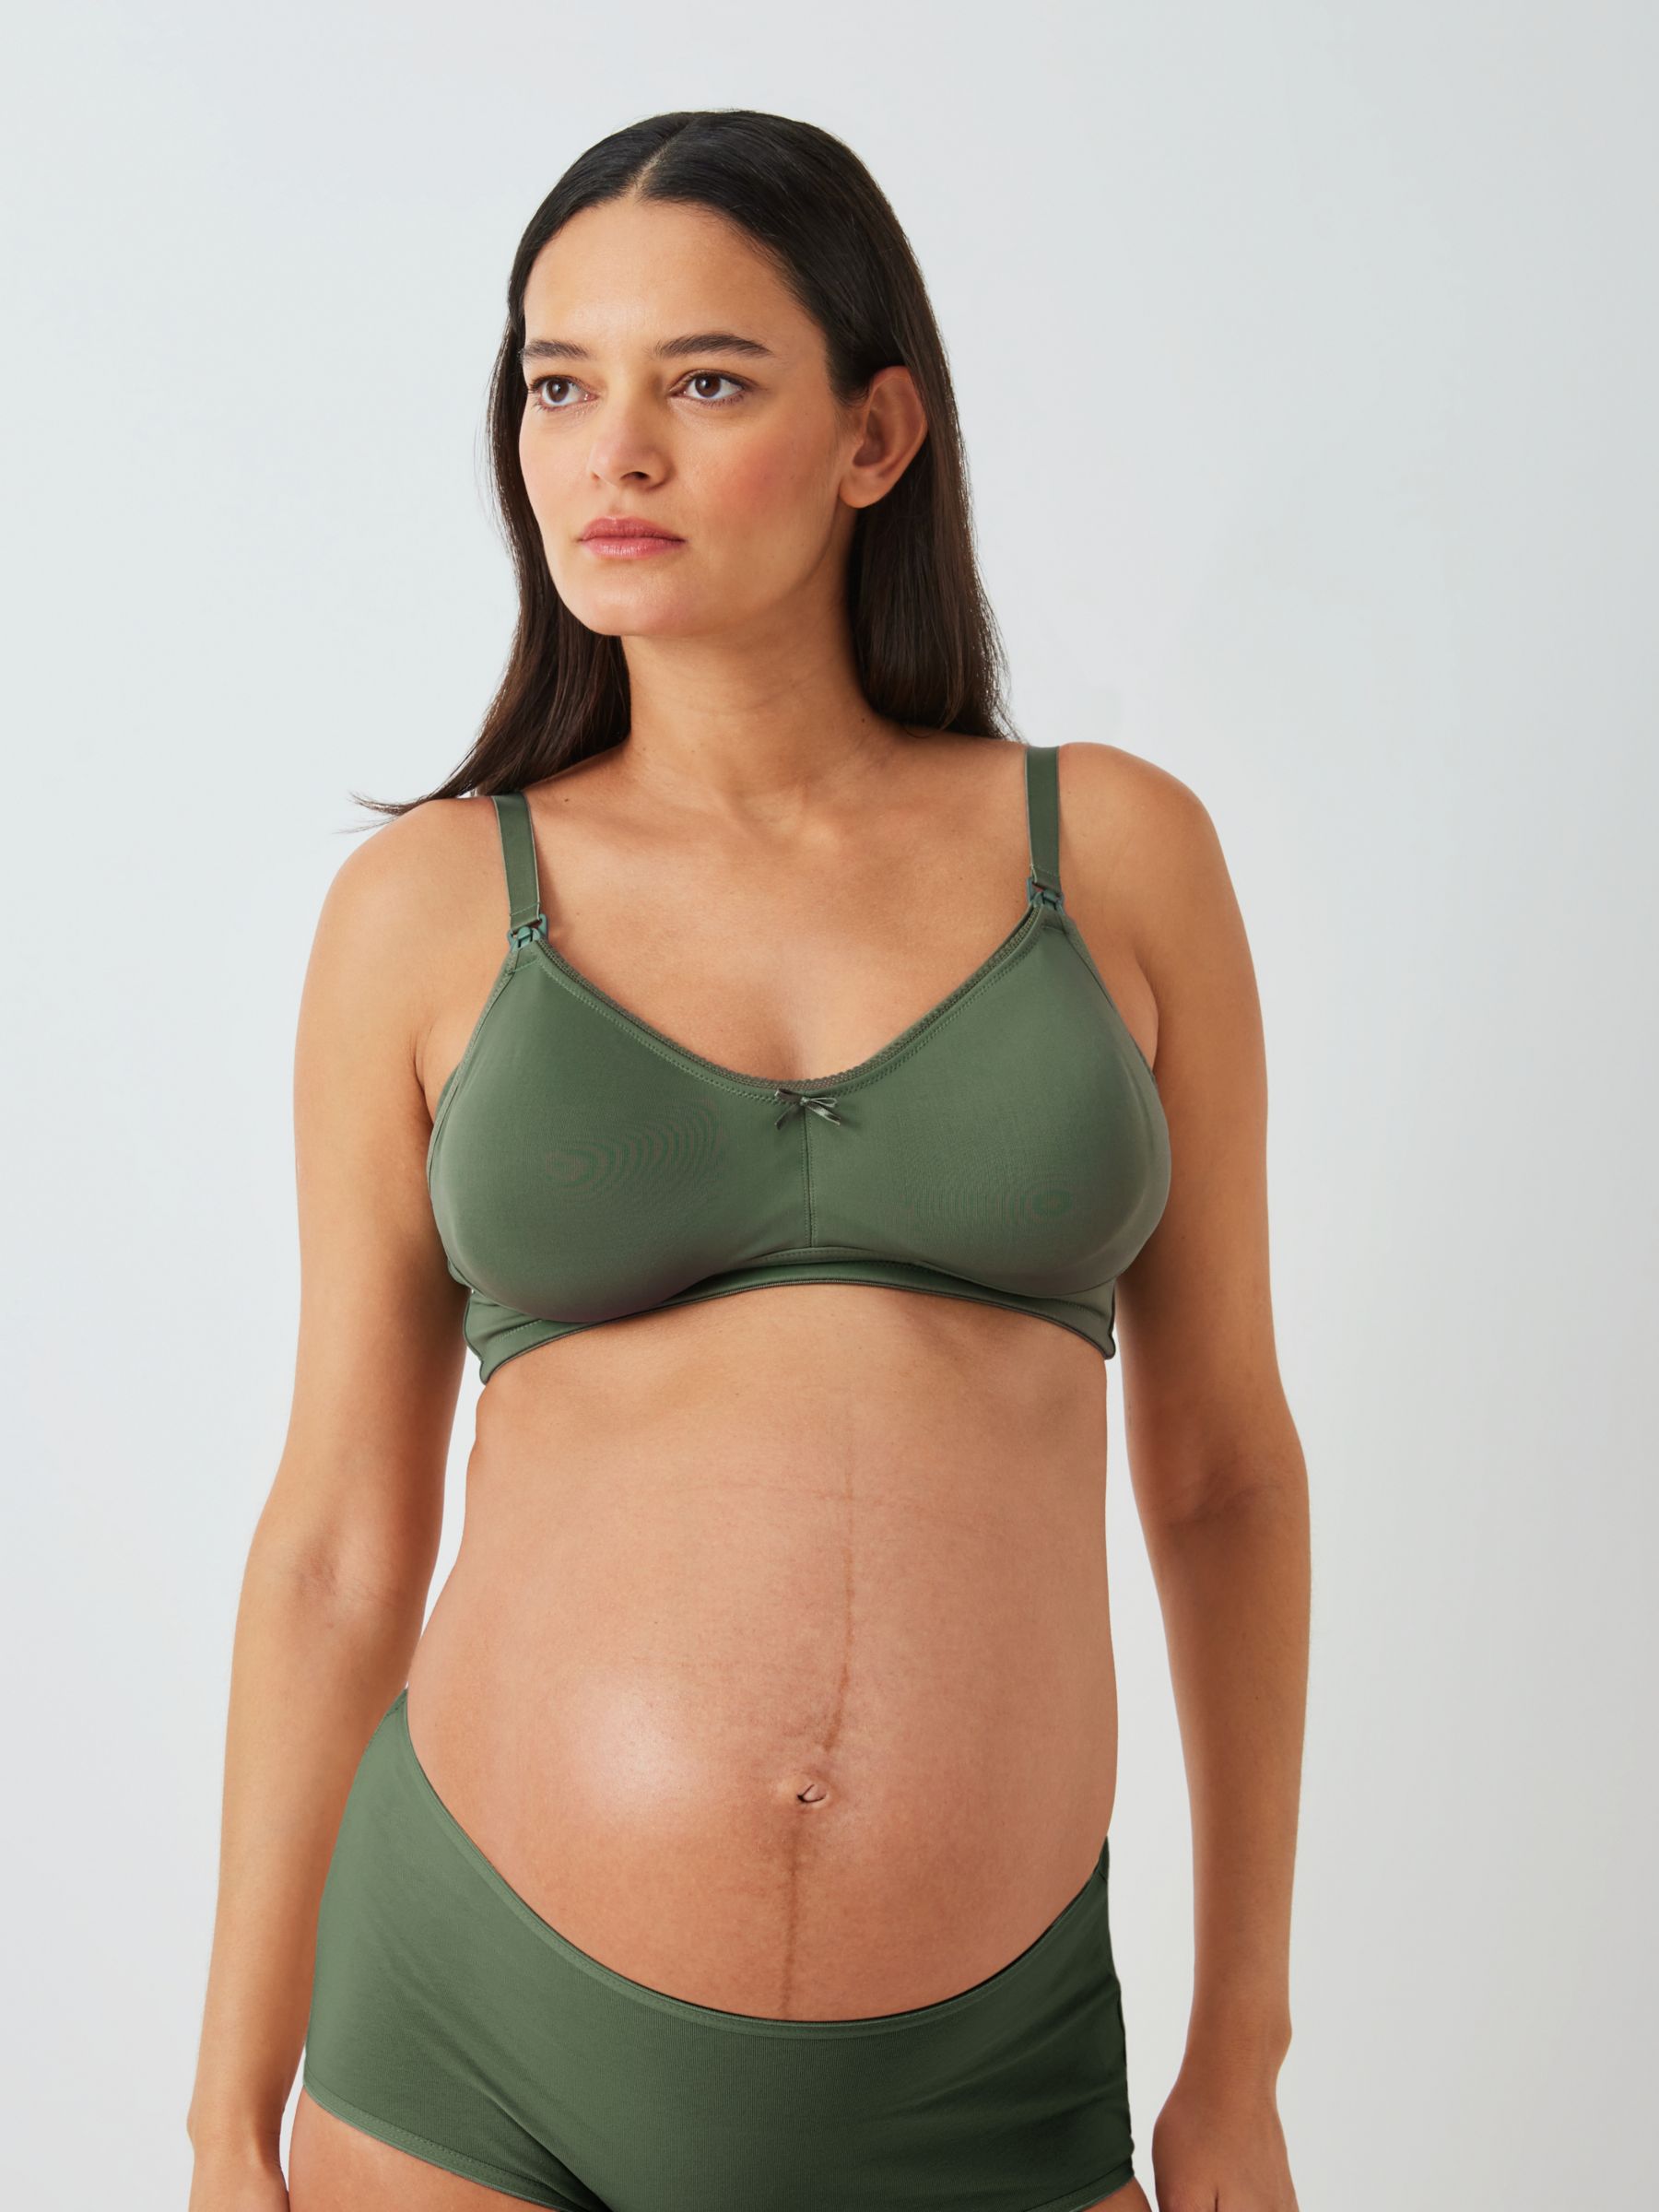 Maternity Bras That Grow With You